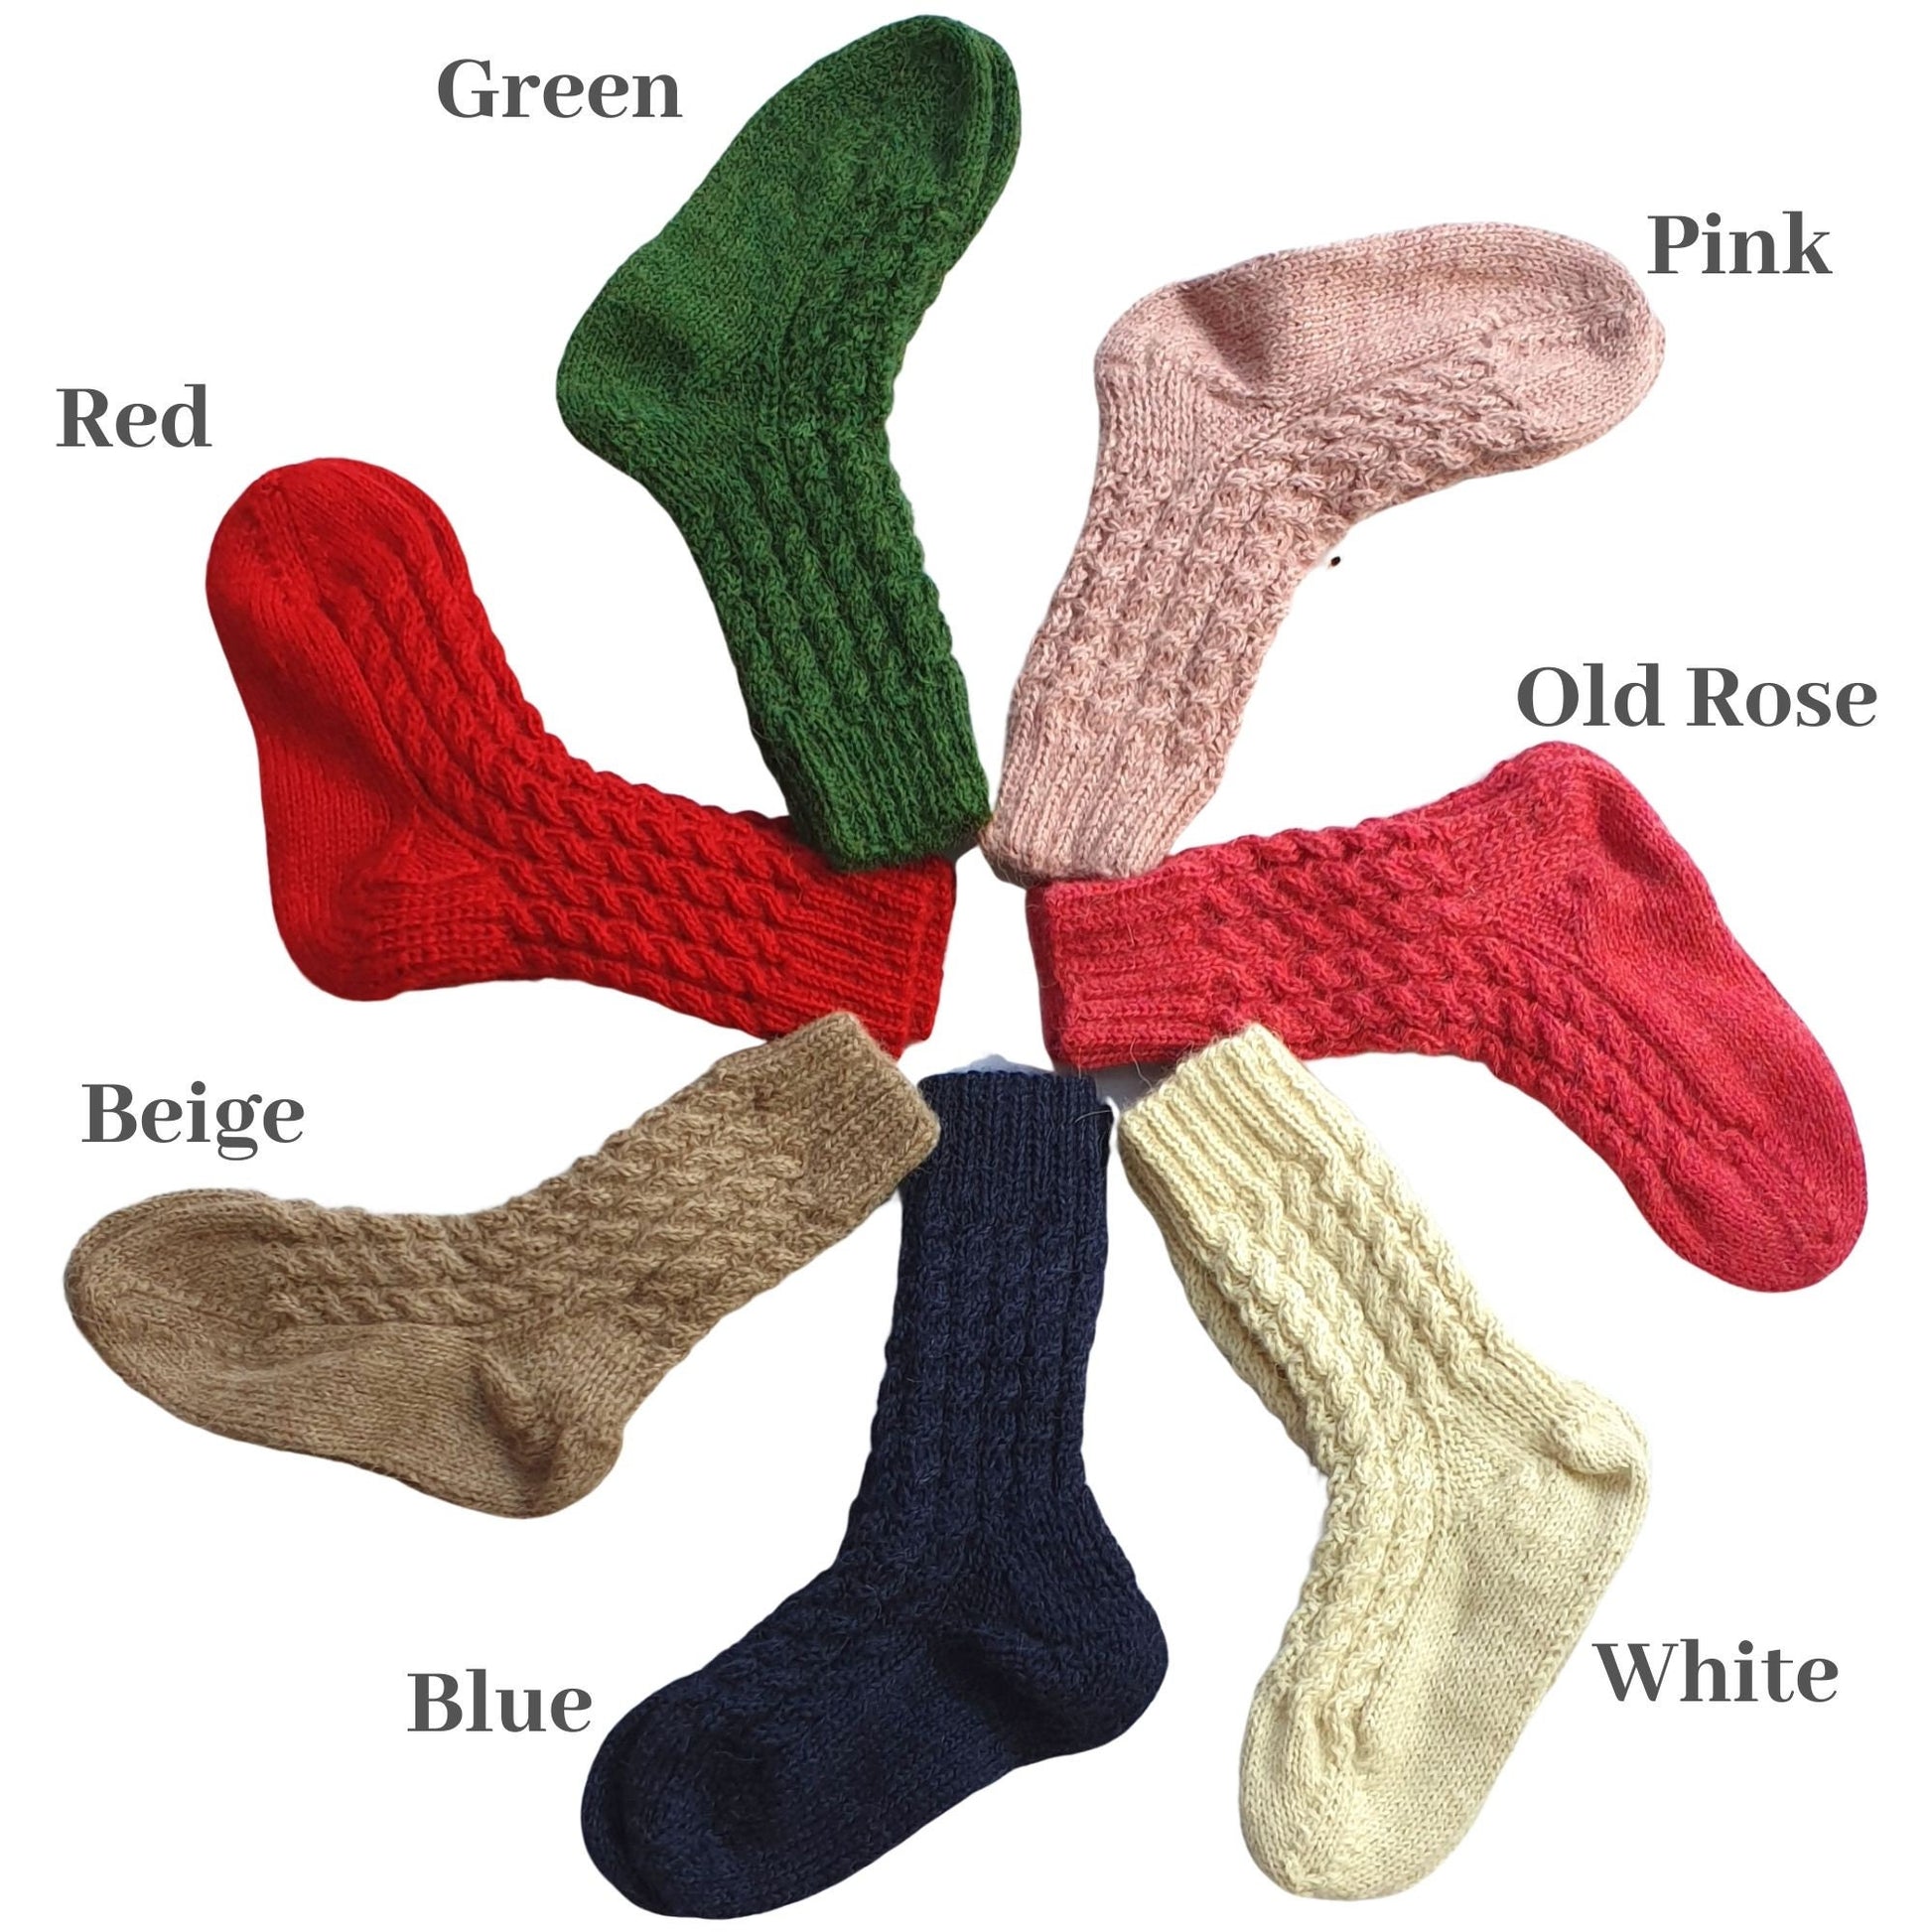 Alpaca Socks Knit Wool, Hand Knitted, 100% Alpaca Winter Socks, Cosy, thick chunky knit. Ethical, fair trade and eco friendly. Plastic free